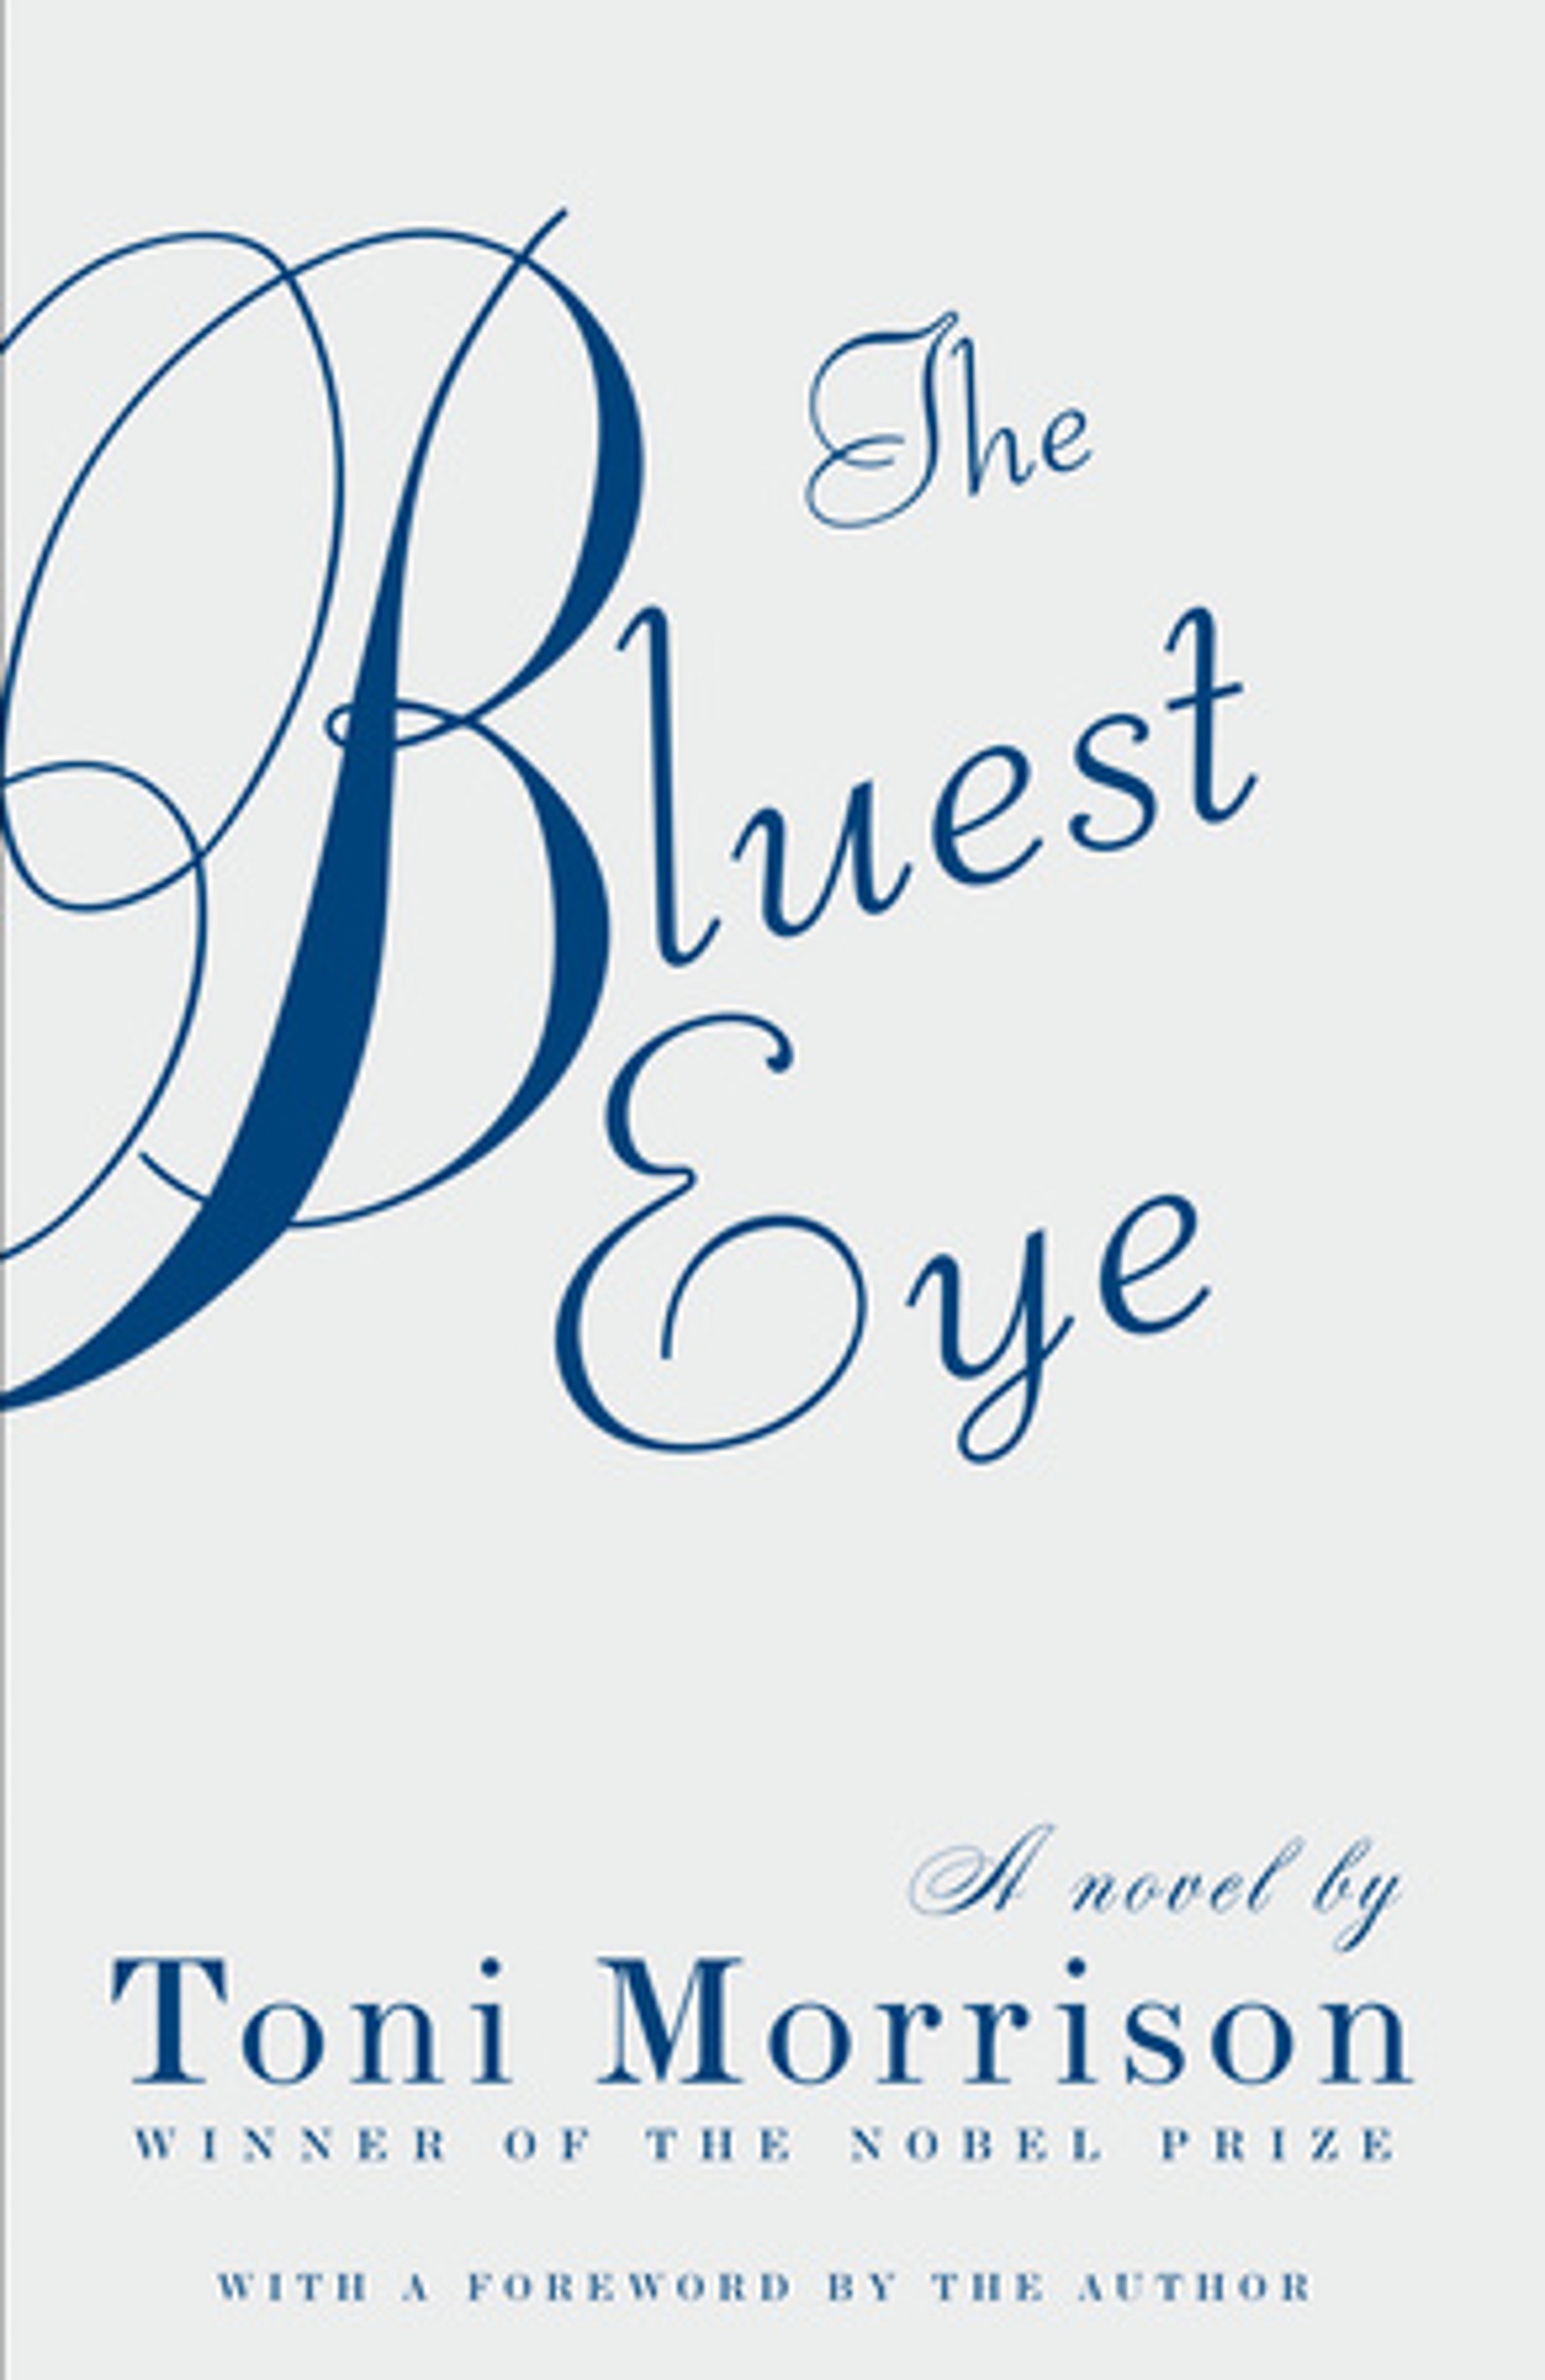 Book cover of The Bluest Eye.